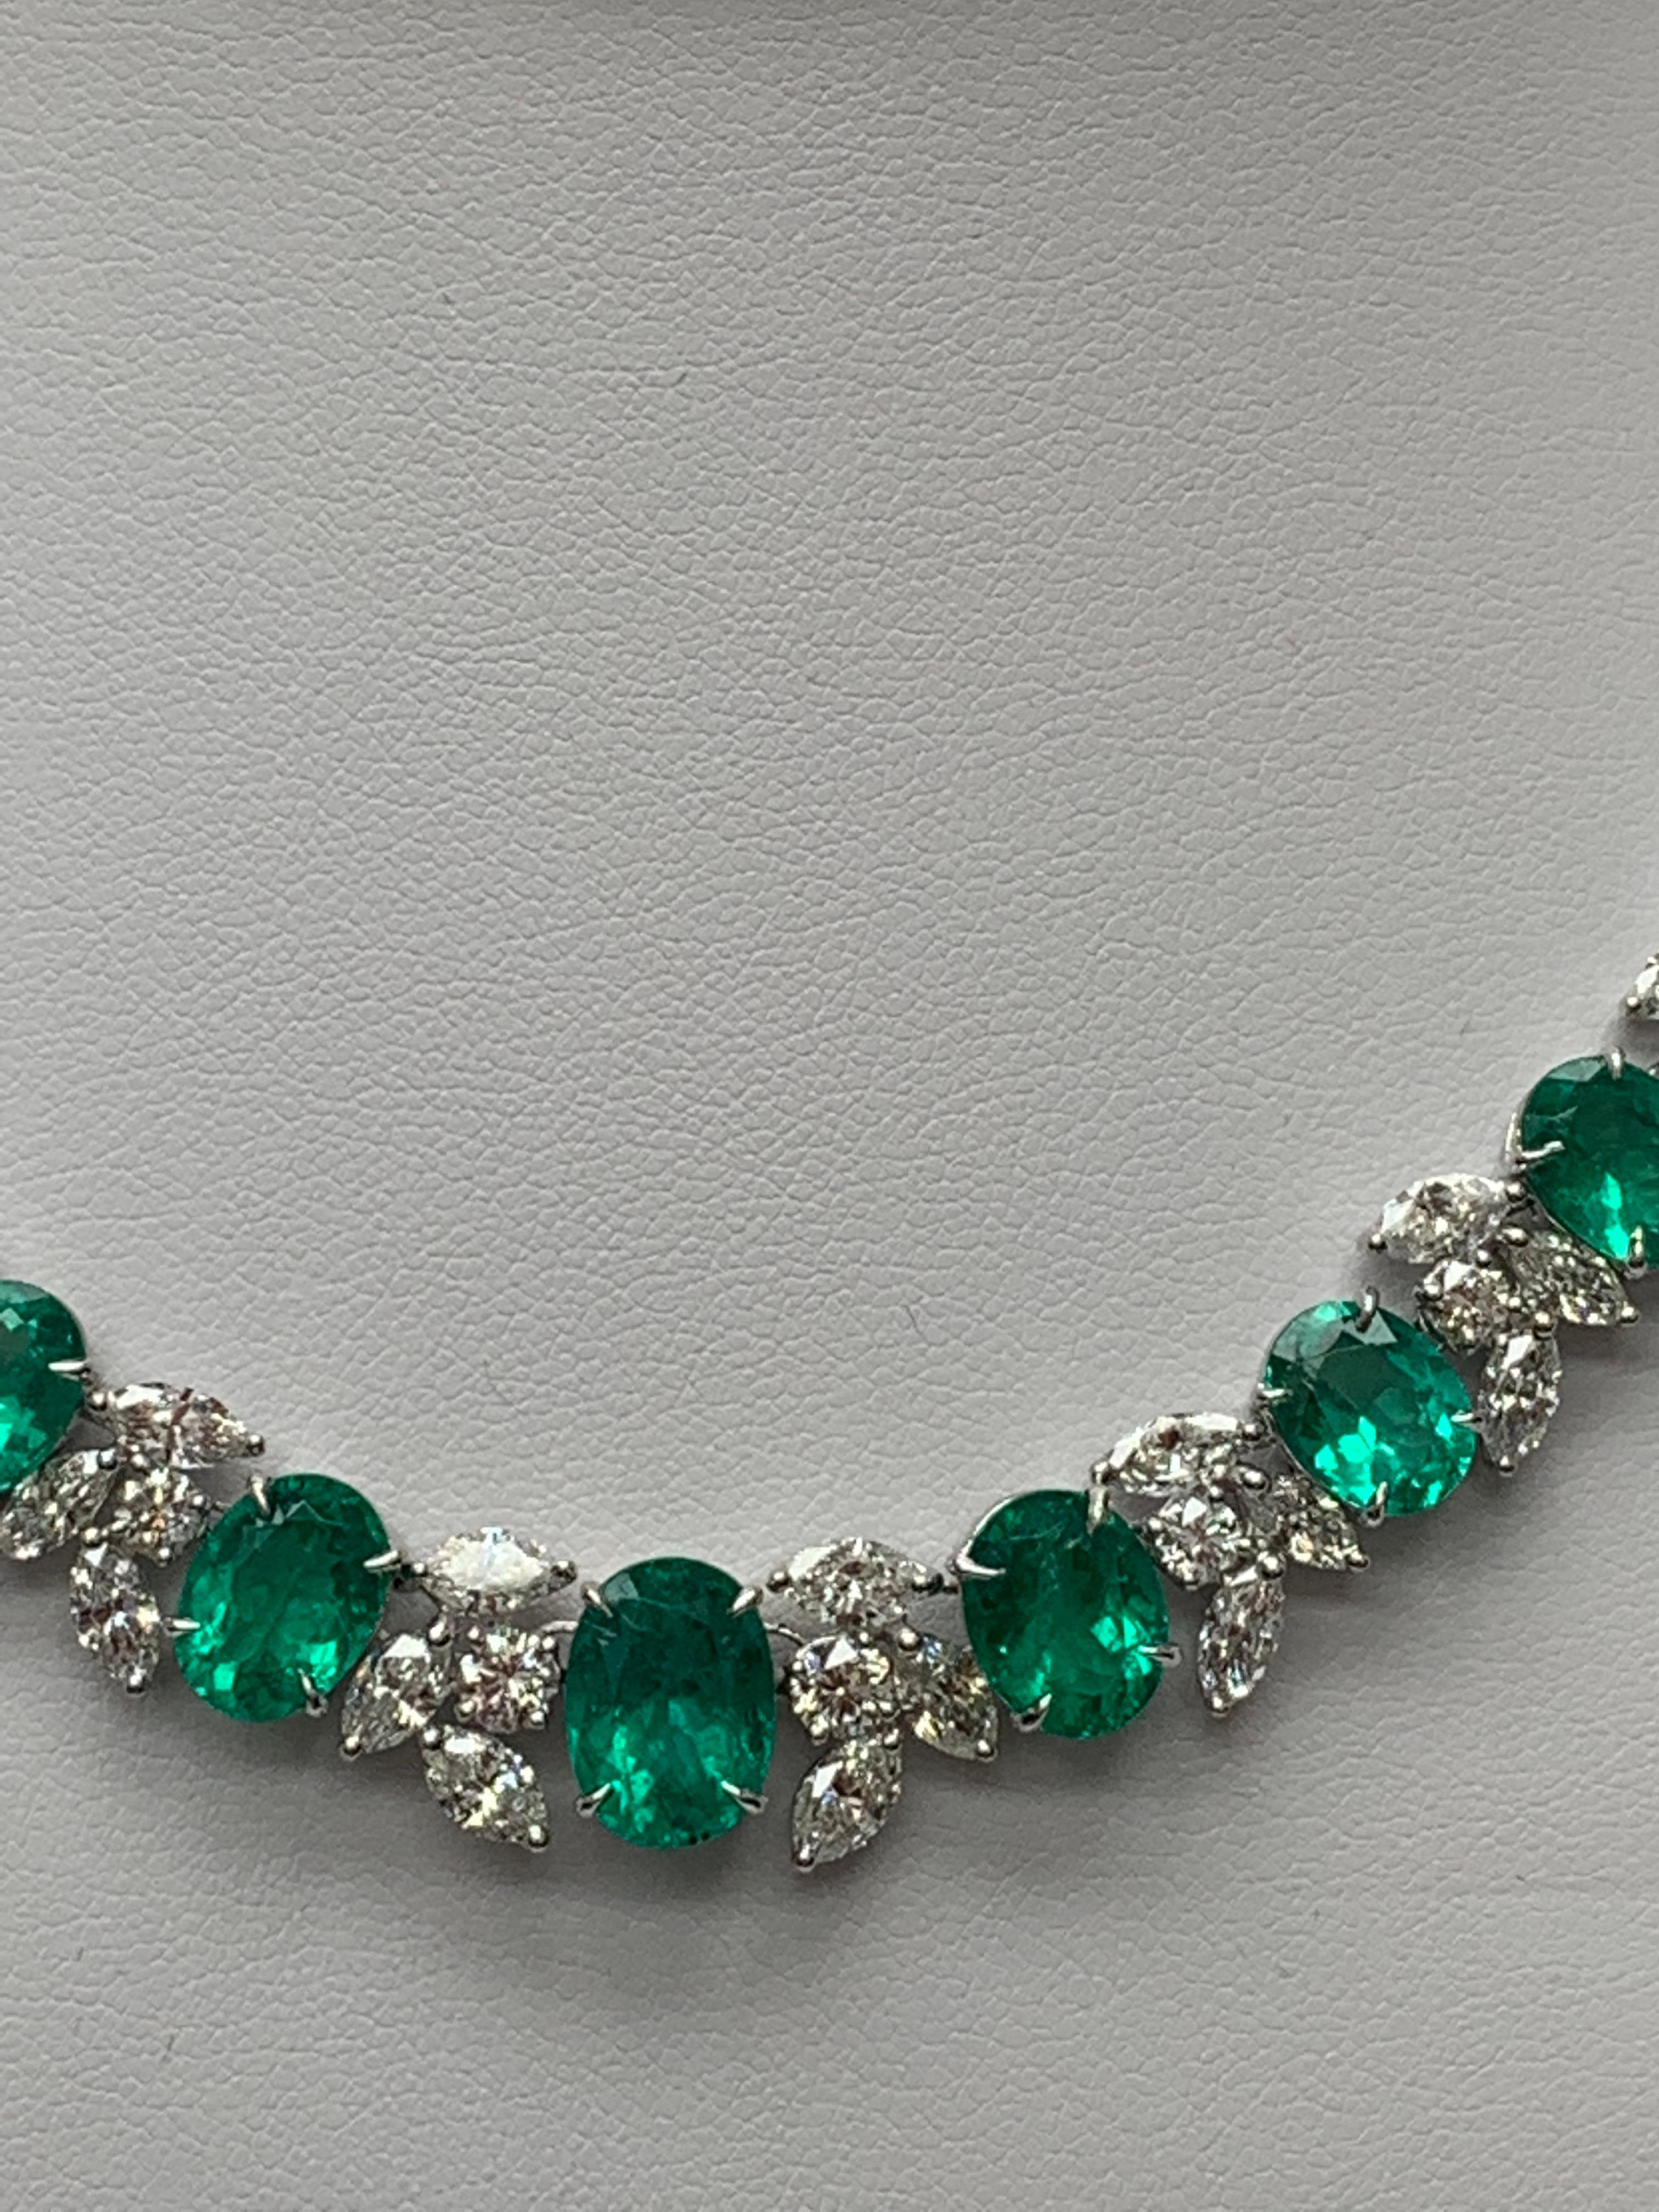 Contemporary 36.87 Carat Emerald and White mixed cut Diamond Necklace in 18k White Gold For Sale